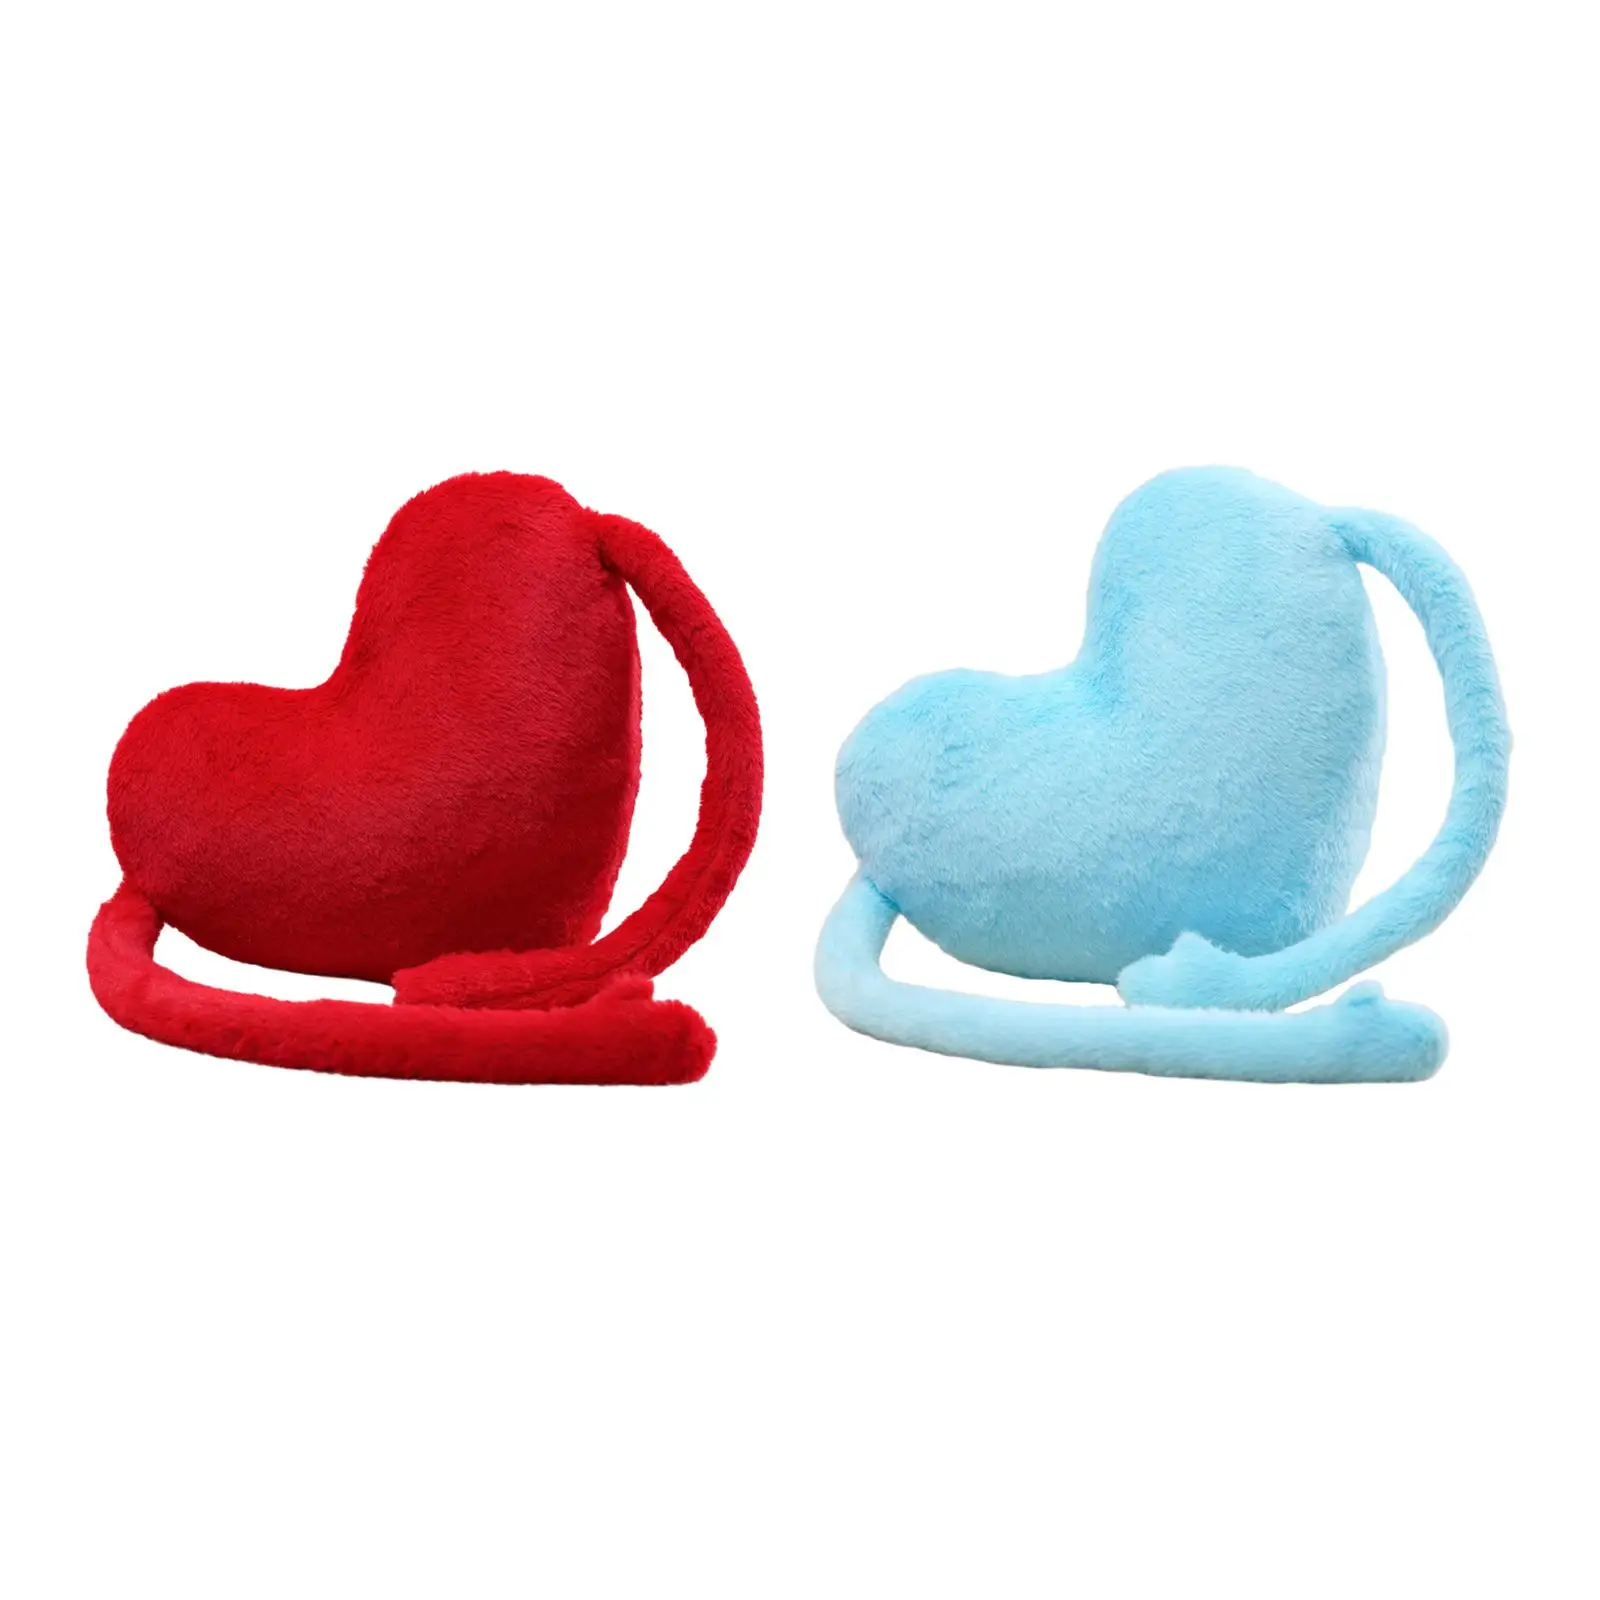 Heart Shaped Pillow Soft Love Pillow Cute Plush Cushion Throw Pillow Valentines Day Decor for Sofa Party Kitchen Home Female